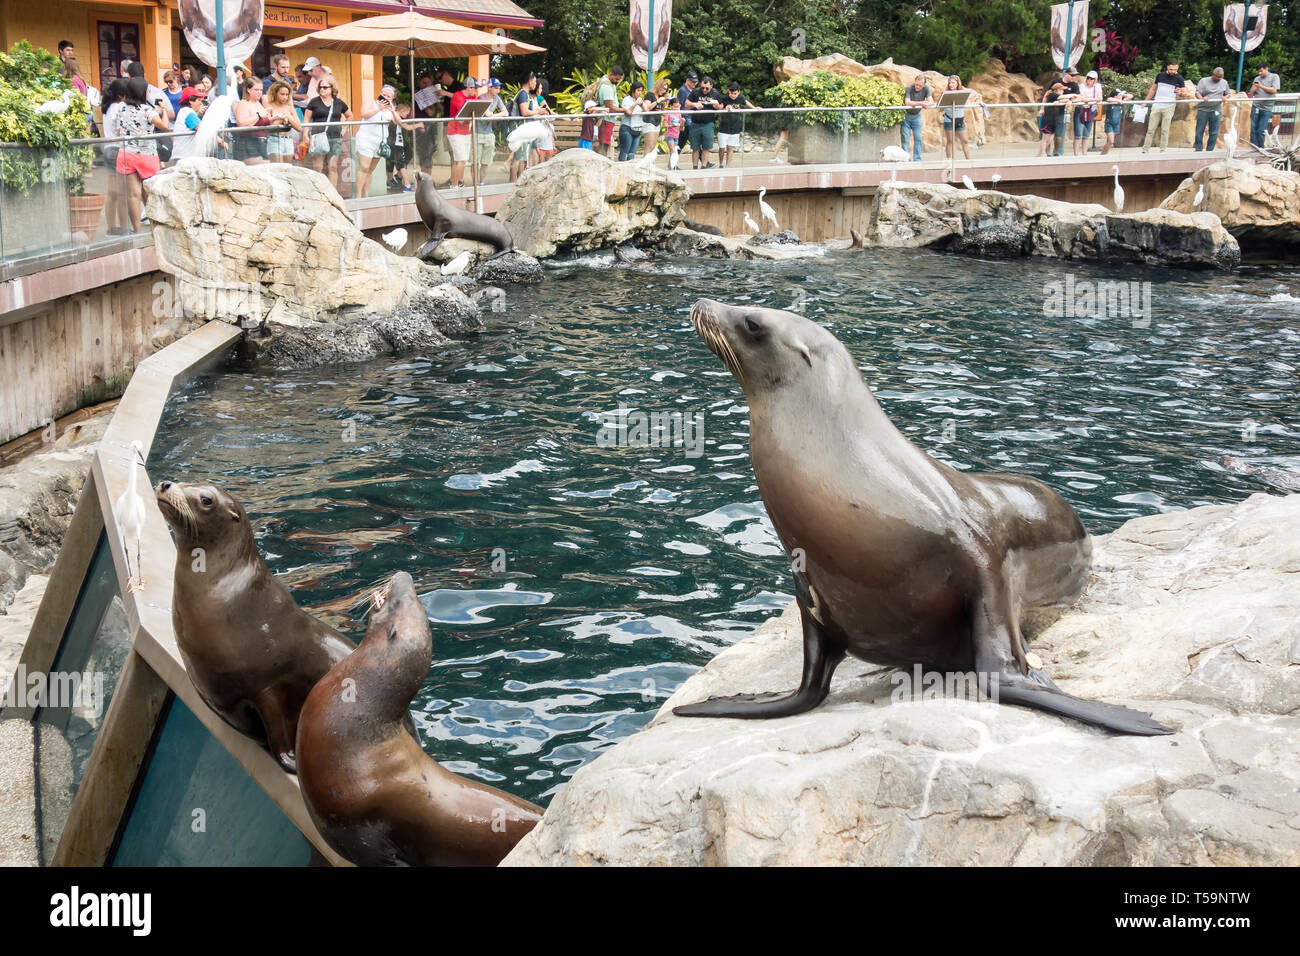 Sea lions on public display seeks attention from tourists as they feed ...